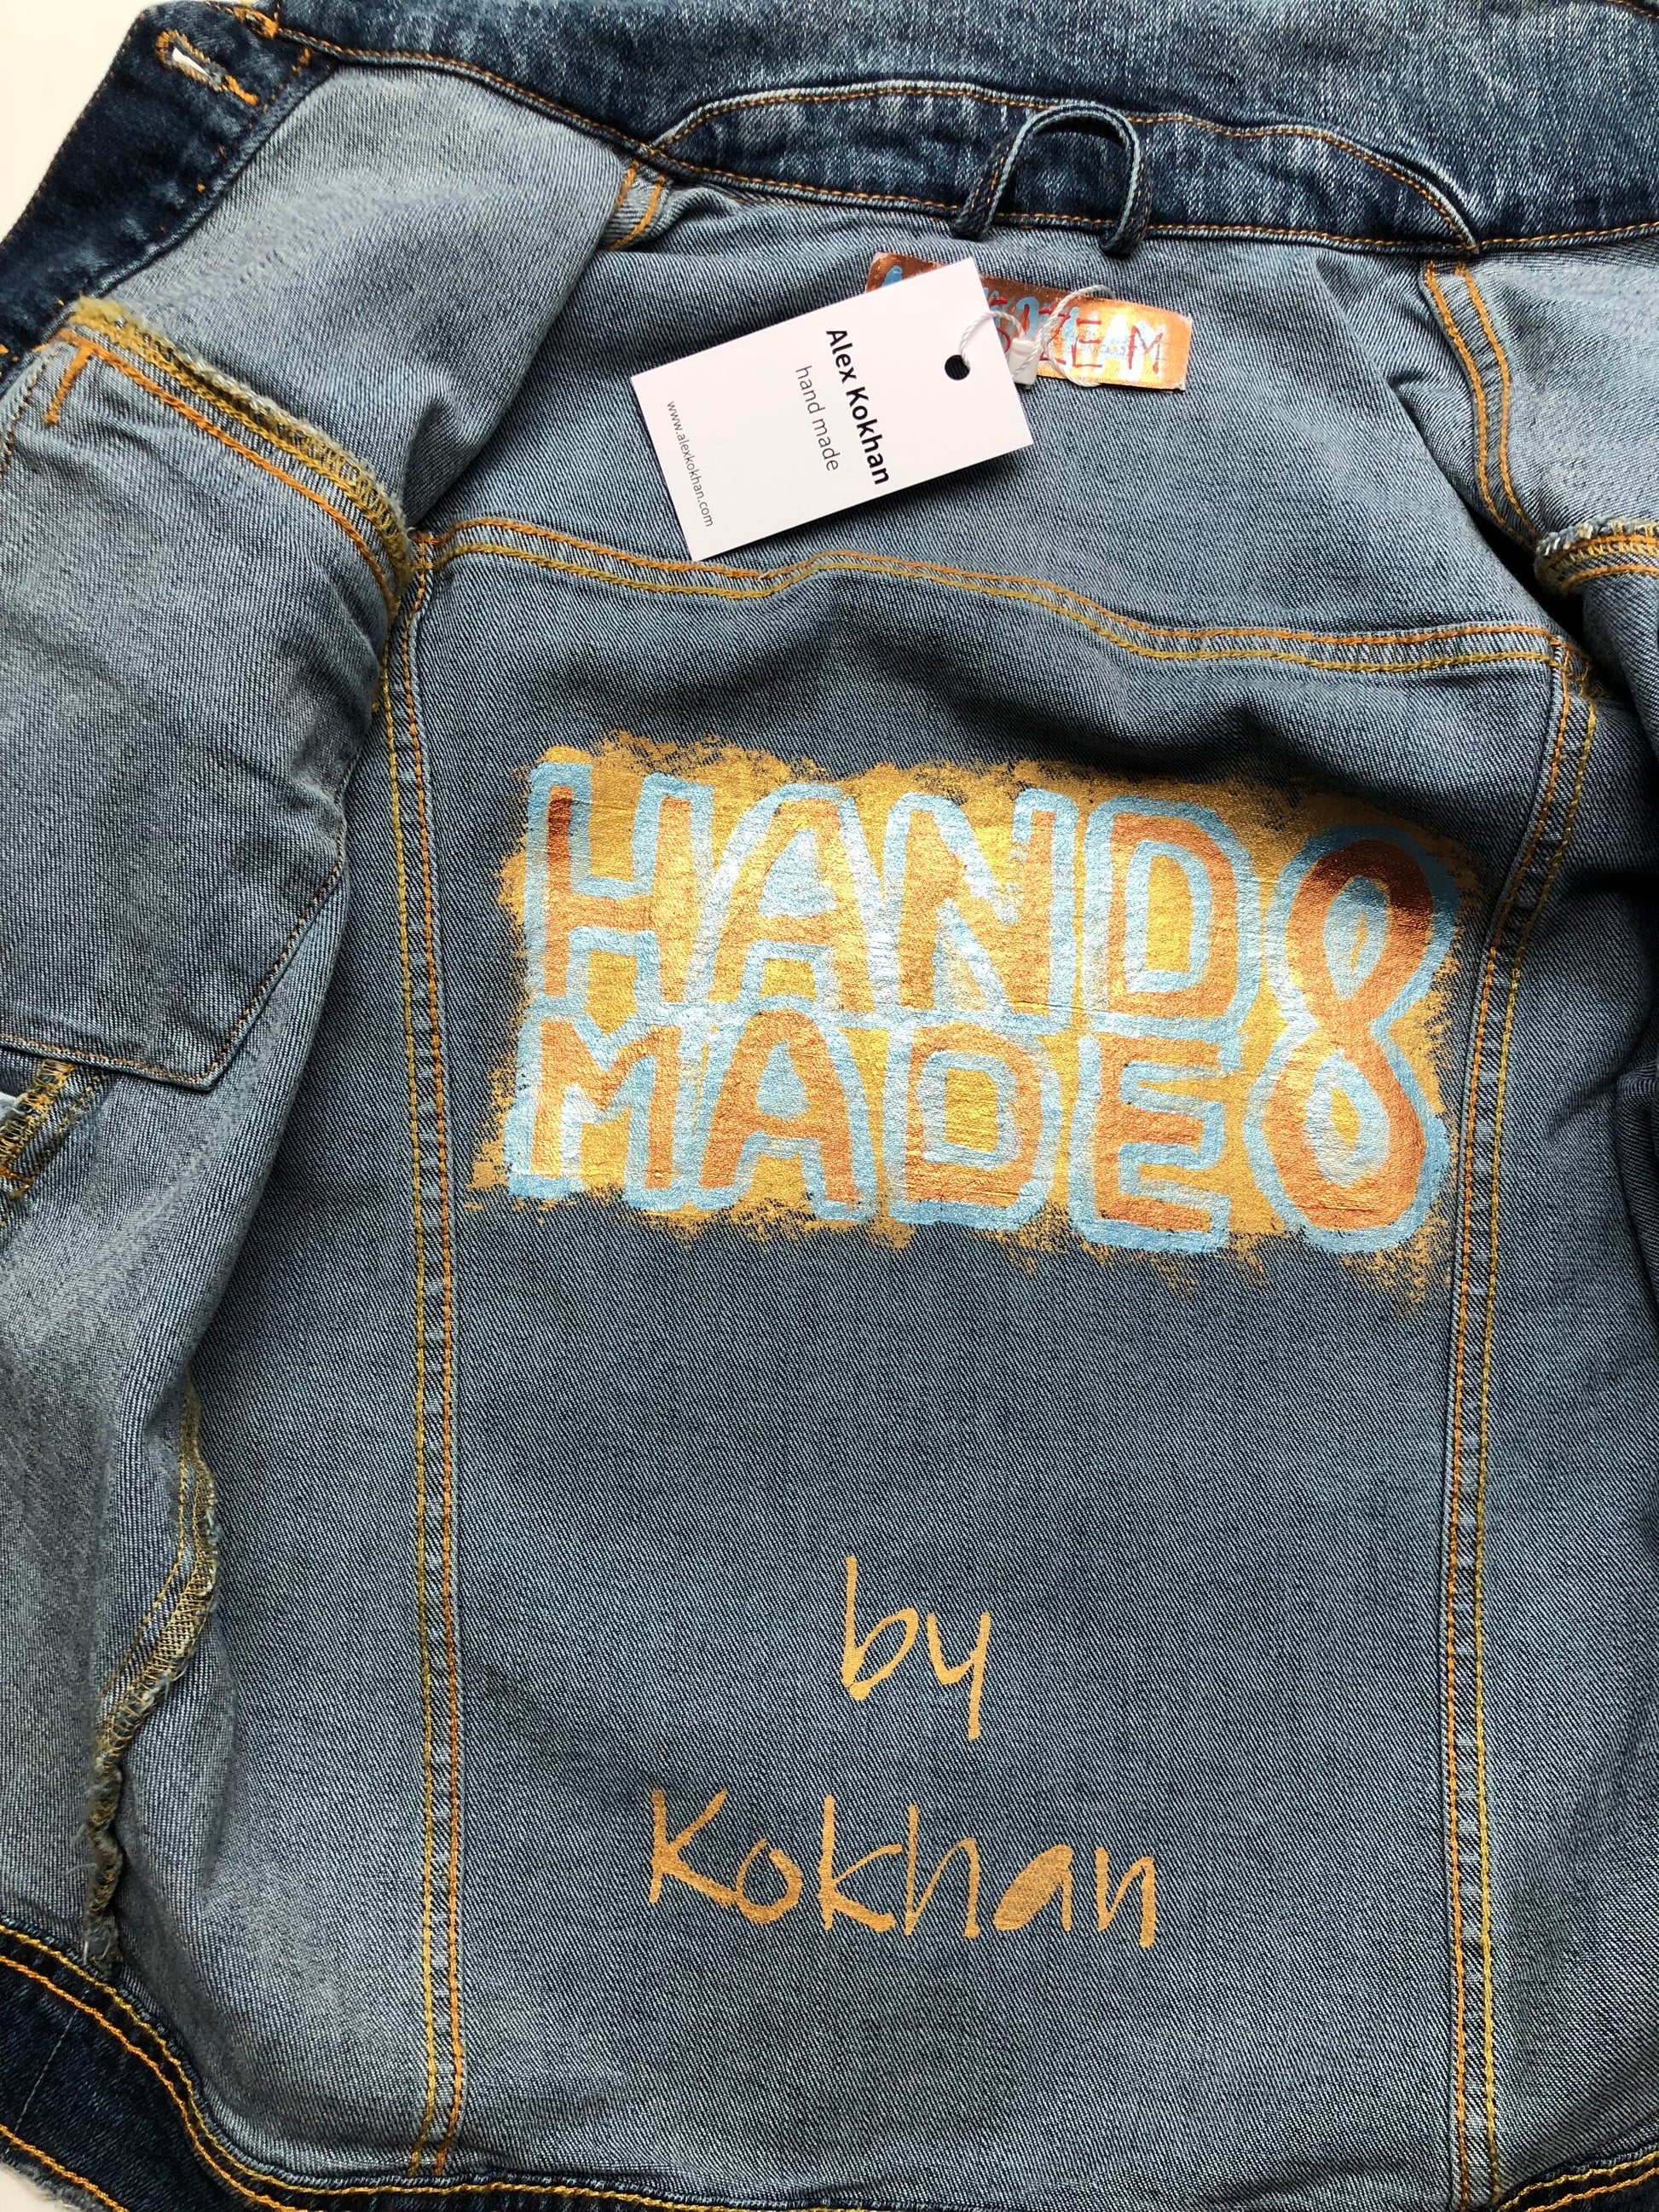 Painting on the inside of a women's denim jacket with a demon